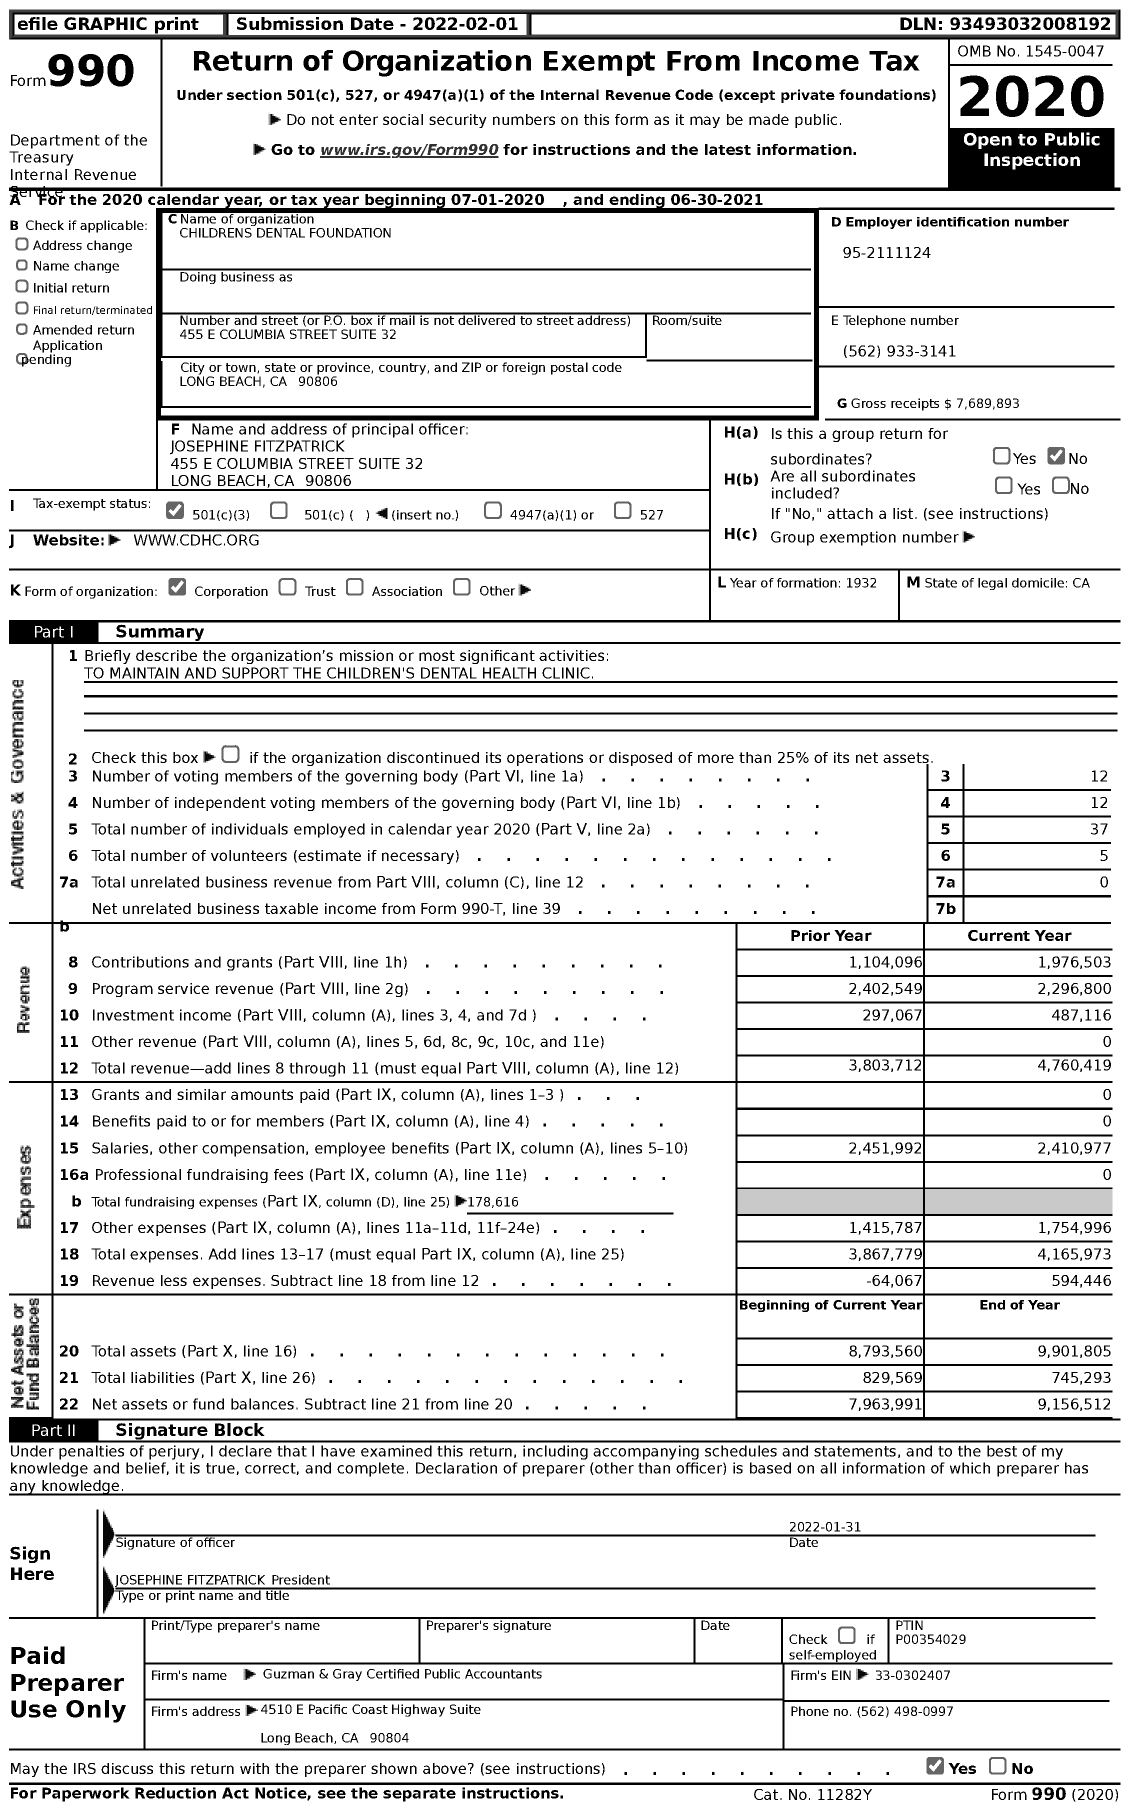 Image of first page of 2020 Form 990 for Children's Dental Health Clinic (CDHC)